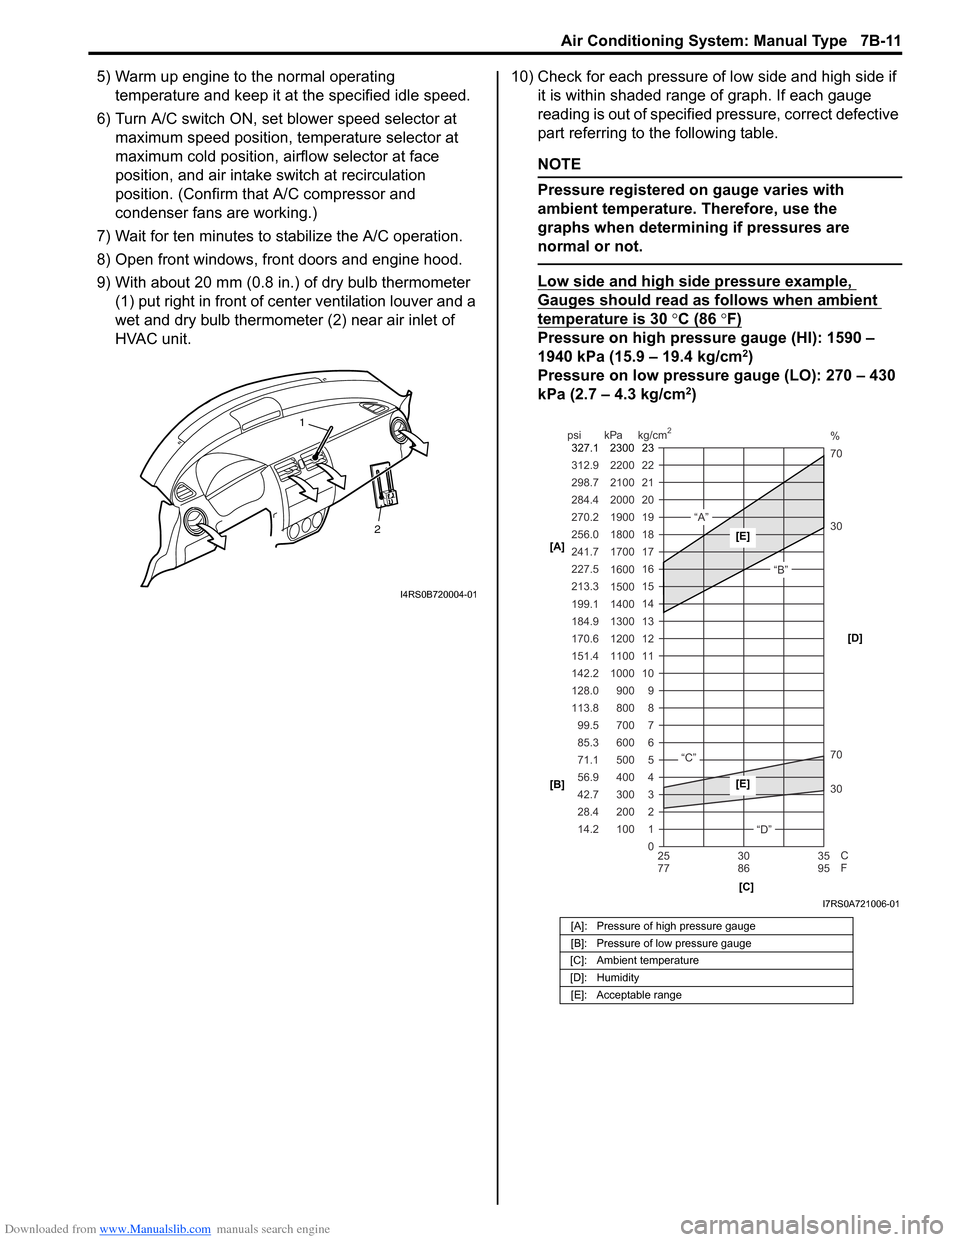 SUZUKI SWIFT 2005 2.G Service Workshop Manual Downloaded from www.Manualslib.com manuals search engine Air Conditioning System: Manual Type 7B-11
5) Warm up engine to the normal operating temperature and keep it at the specified idle speed.
6) Tu